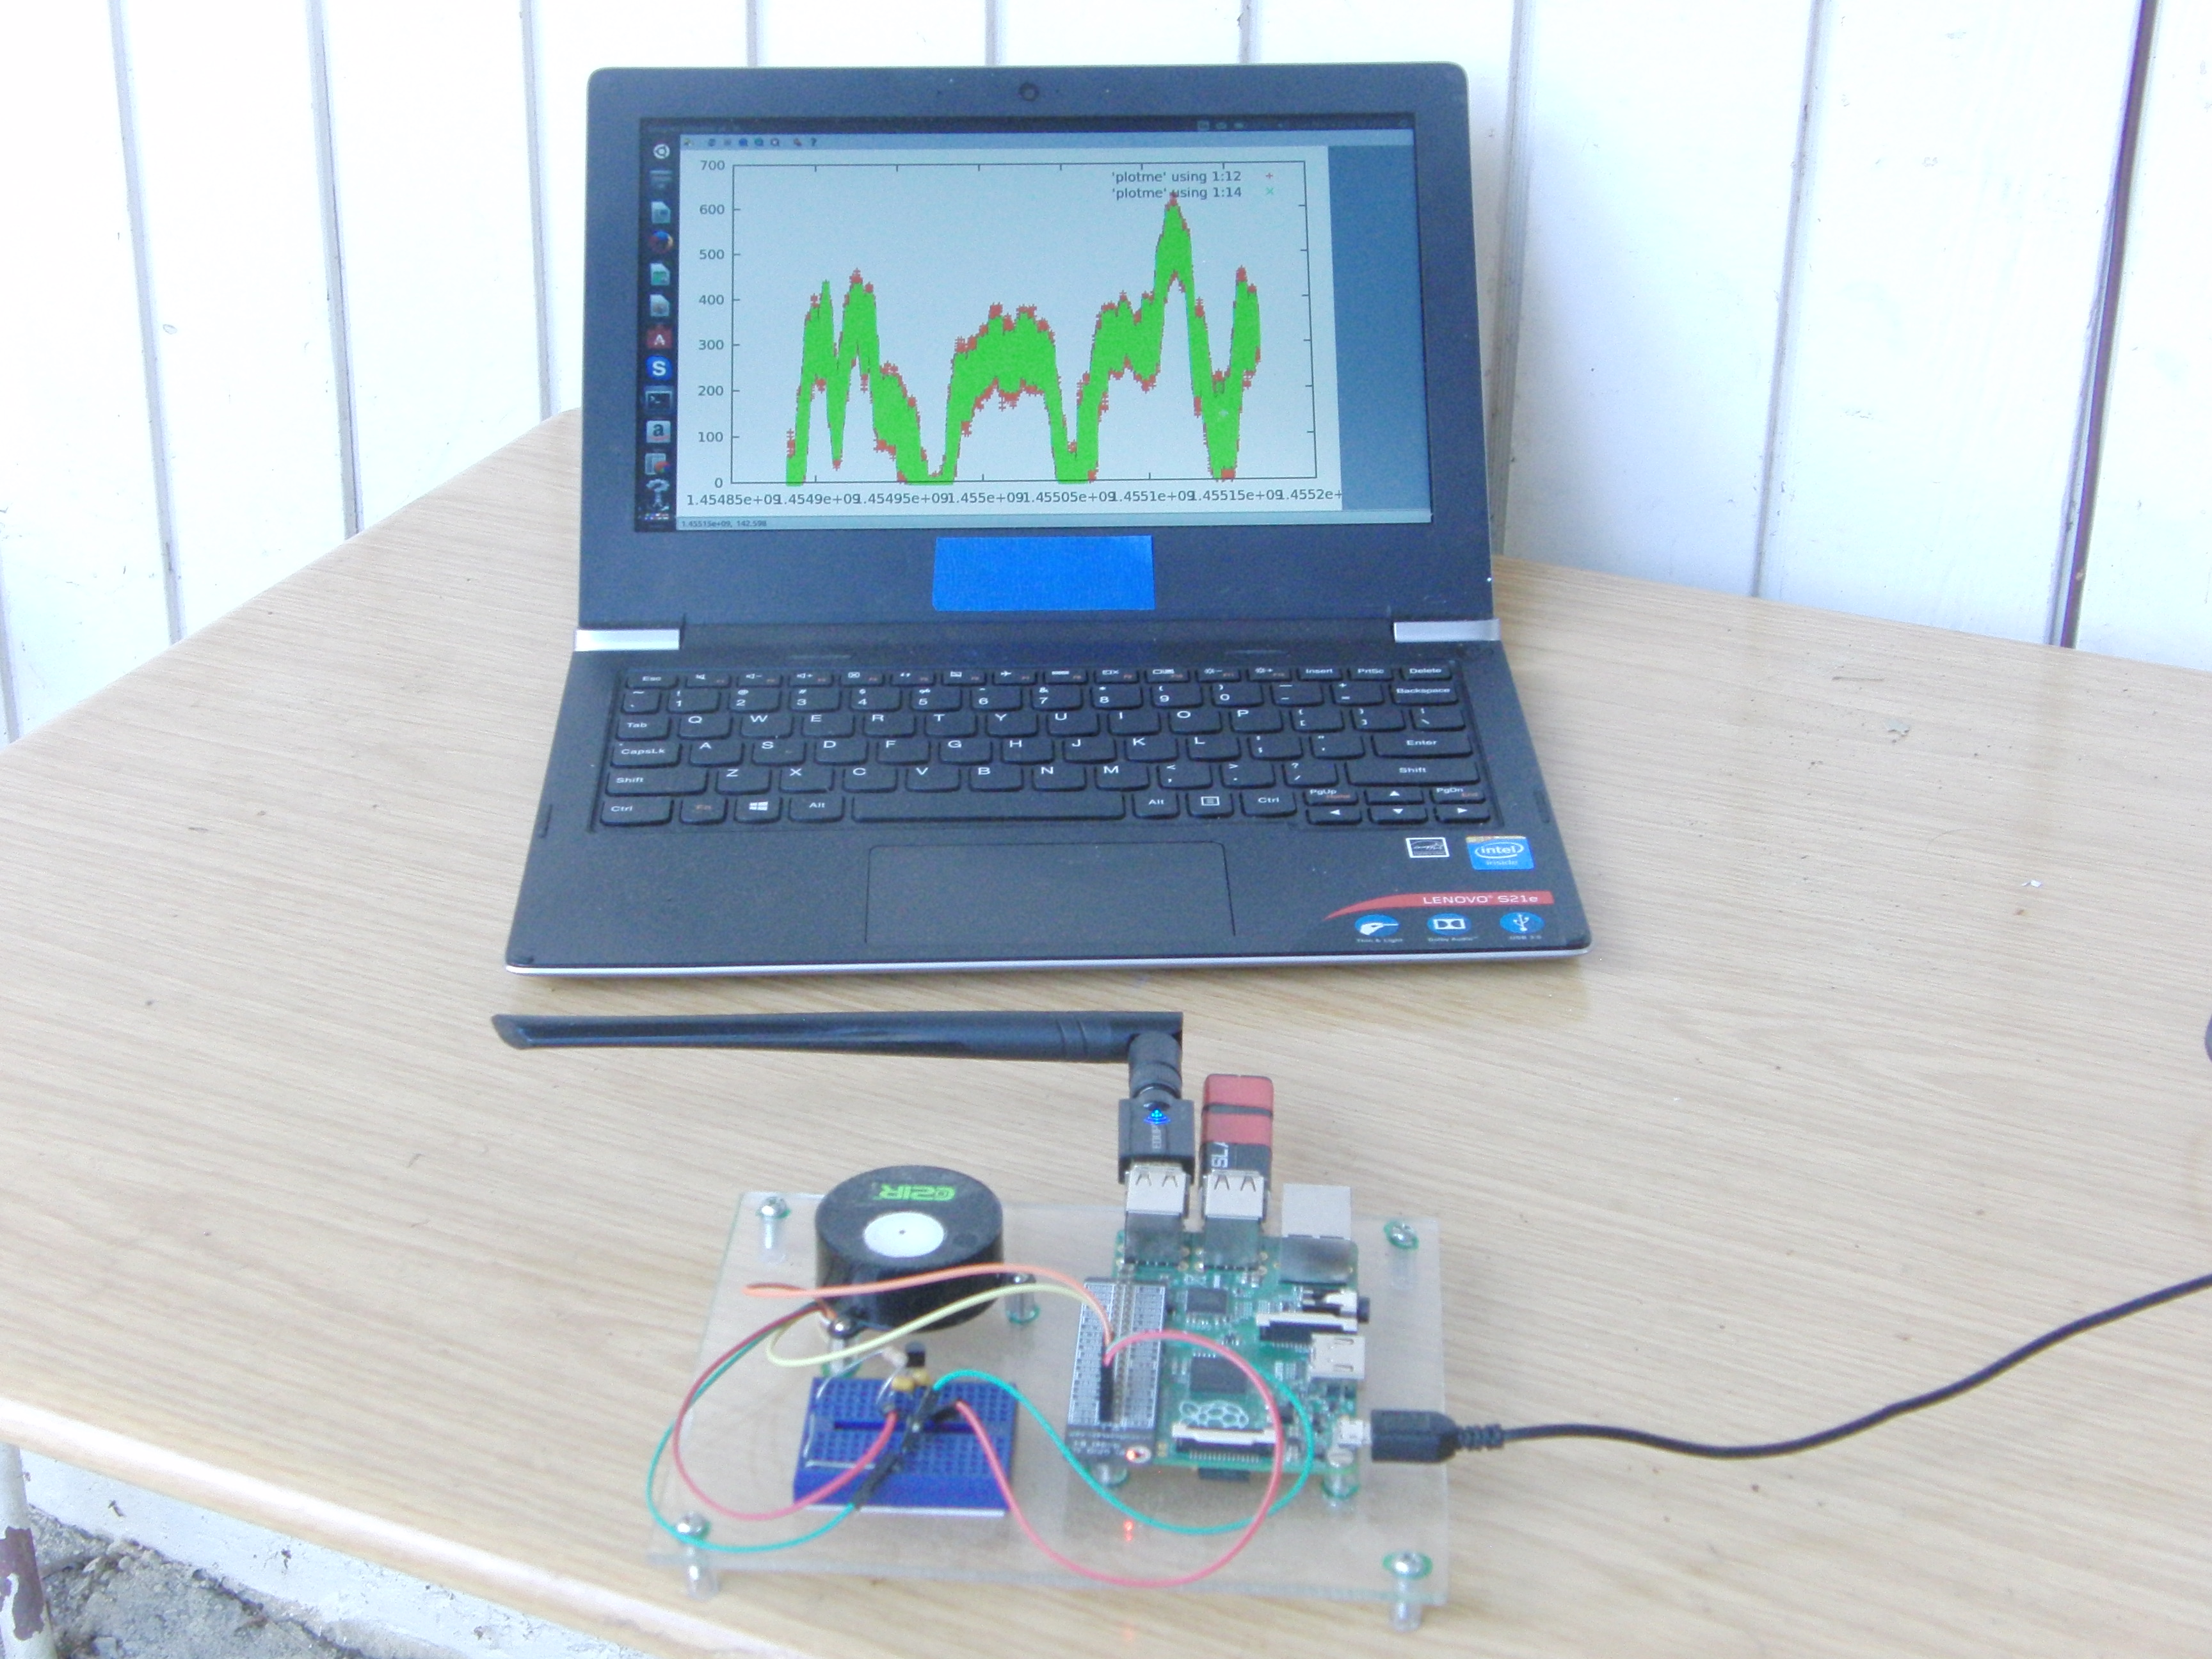 Atmospheric CO2 measurement devices for learning and social change